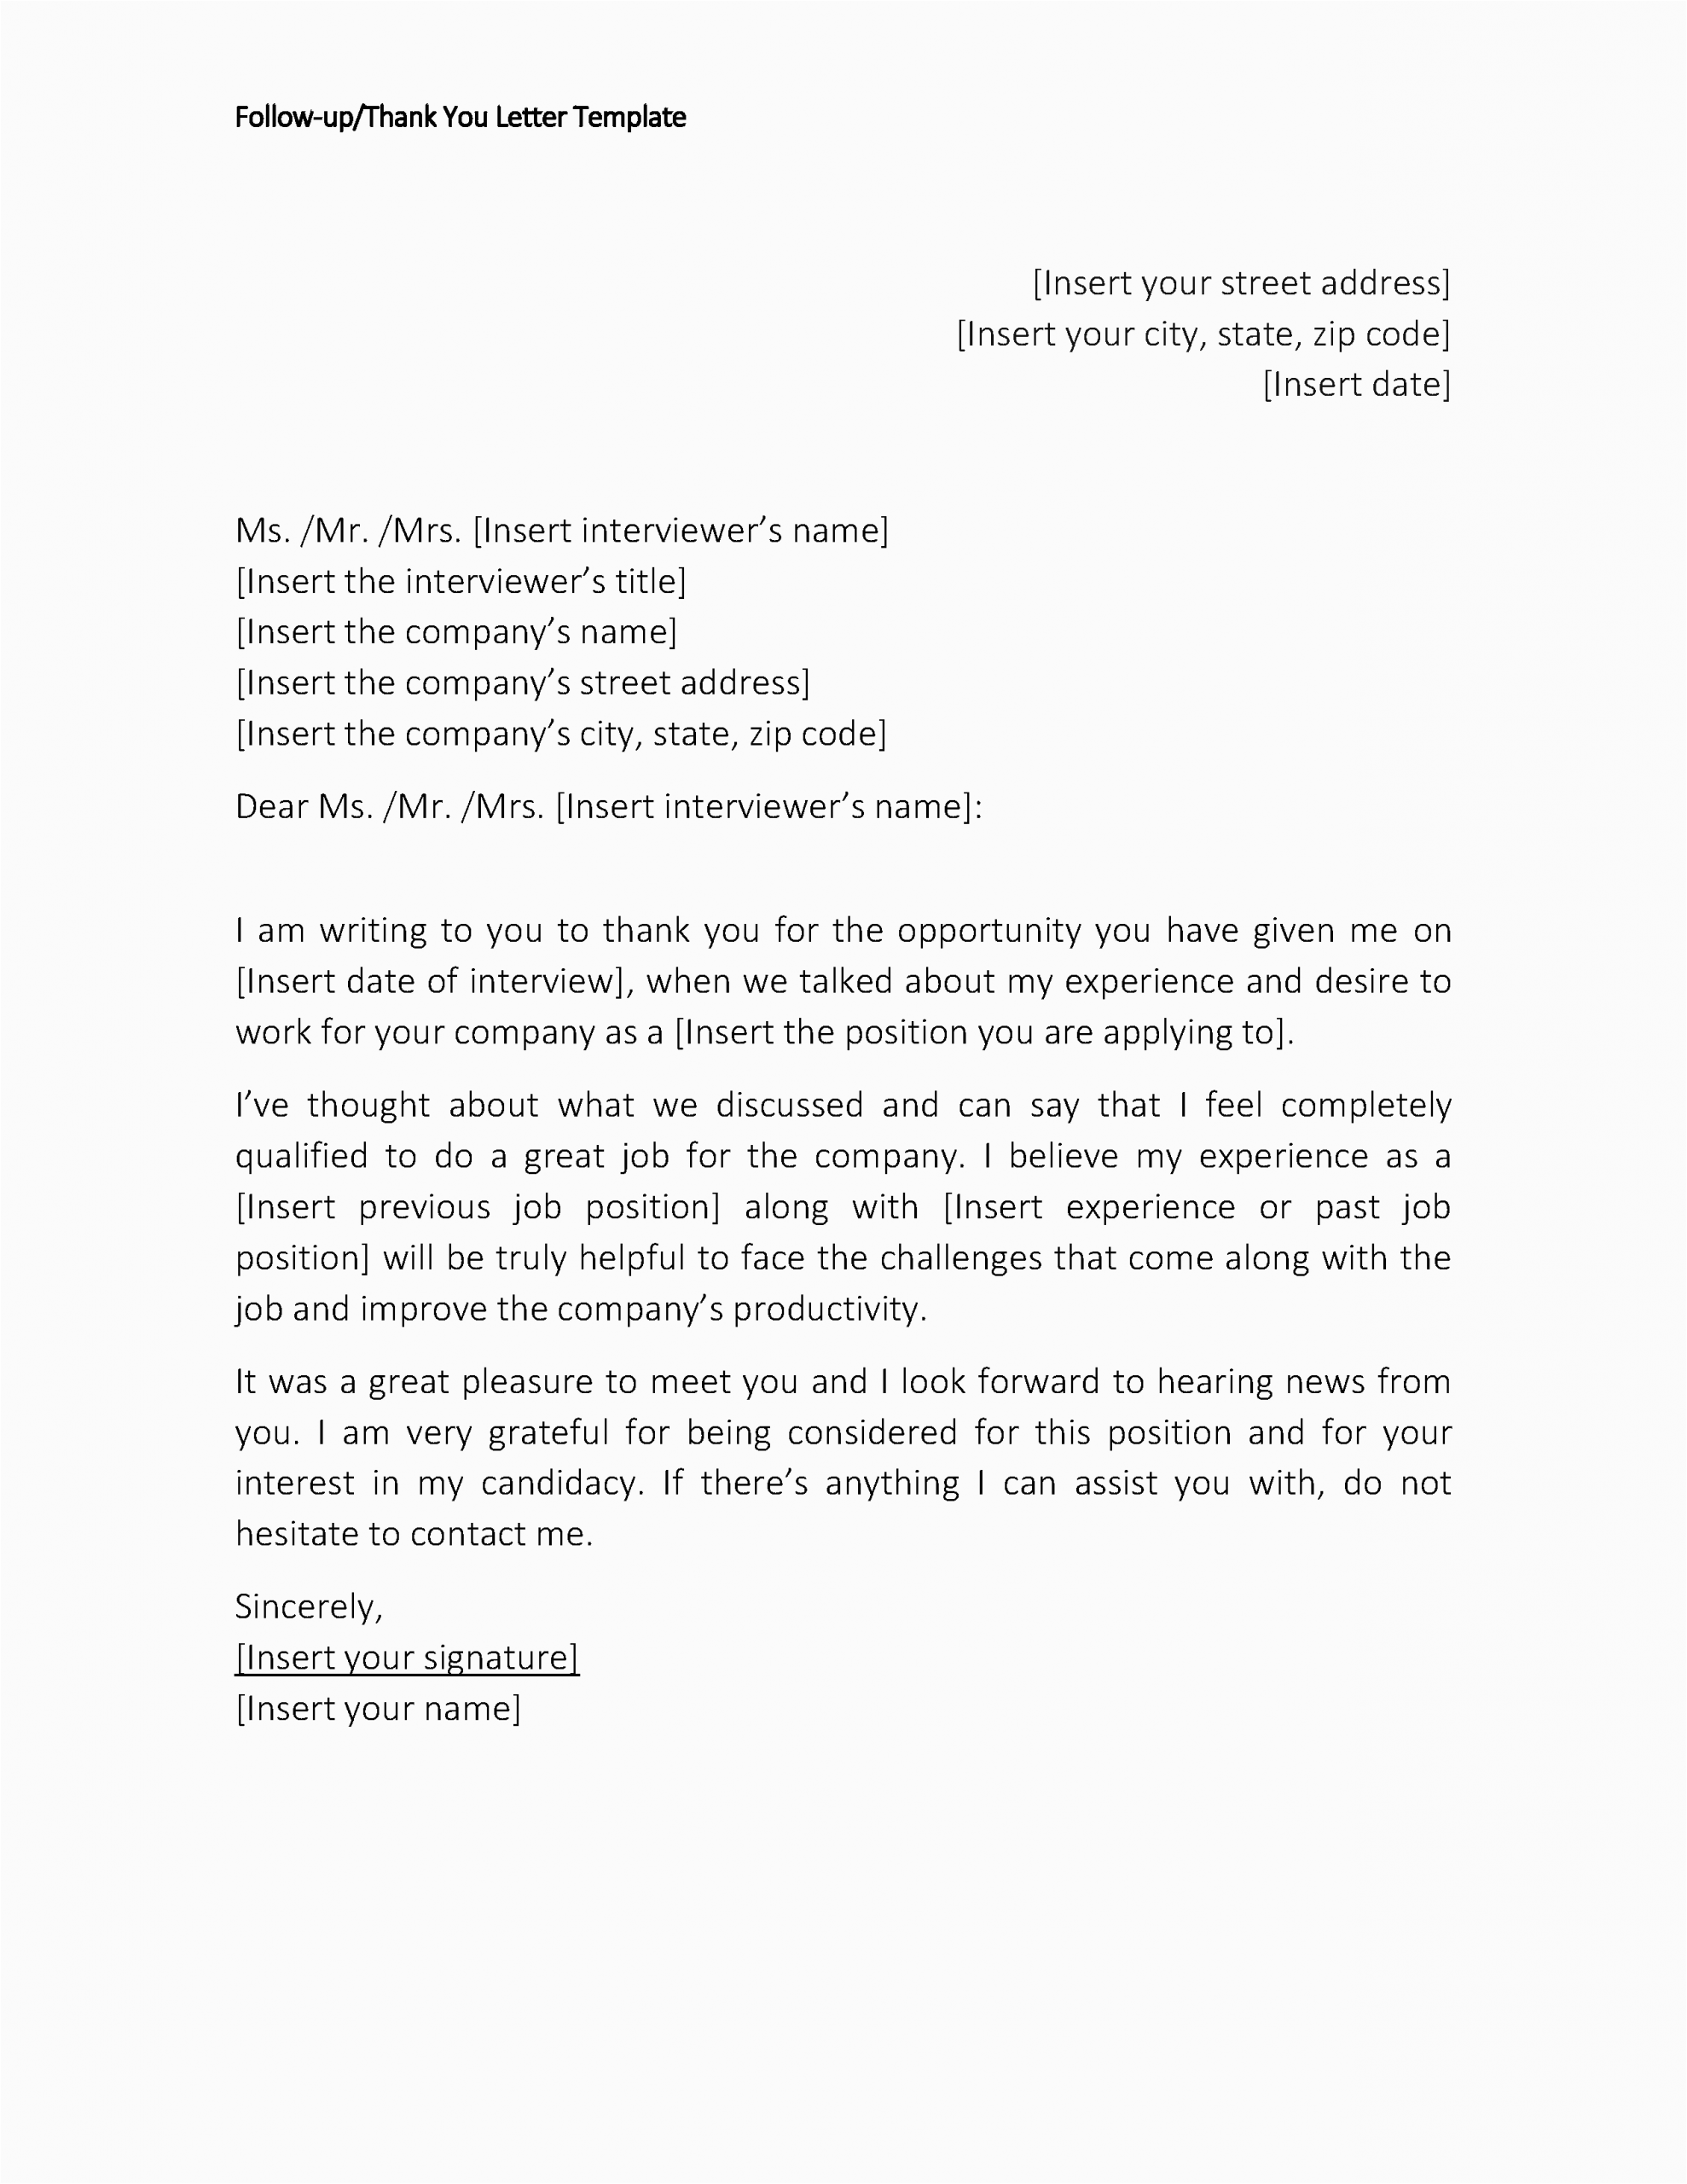 Follow Up after Resume Submission Sample Follow Up Letter after Submitting Resume for Your Needs